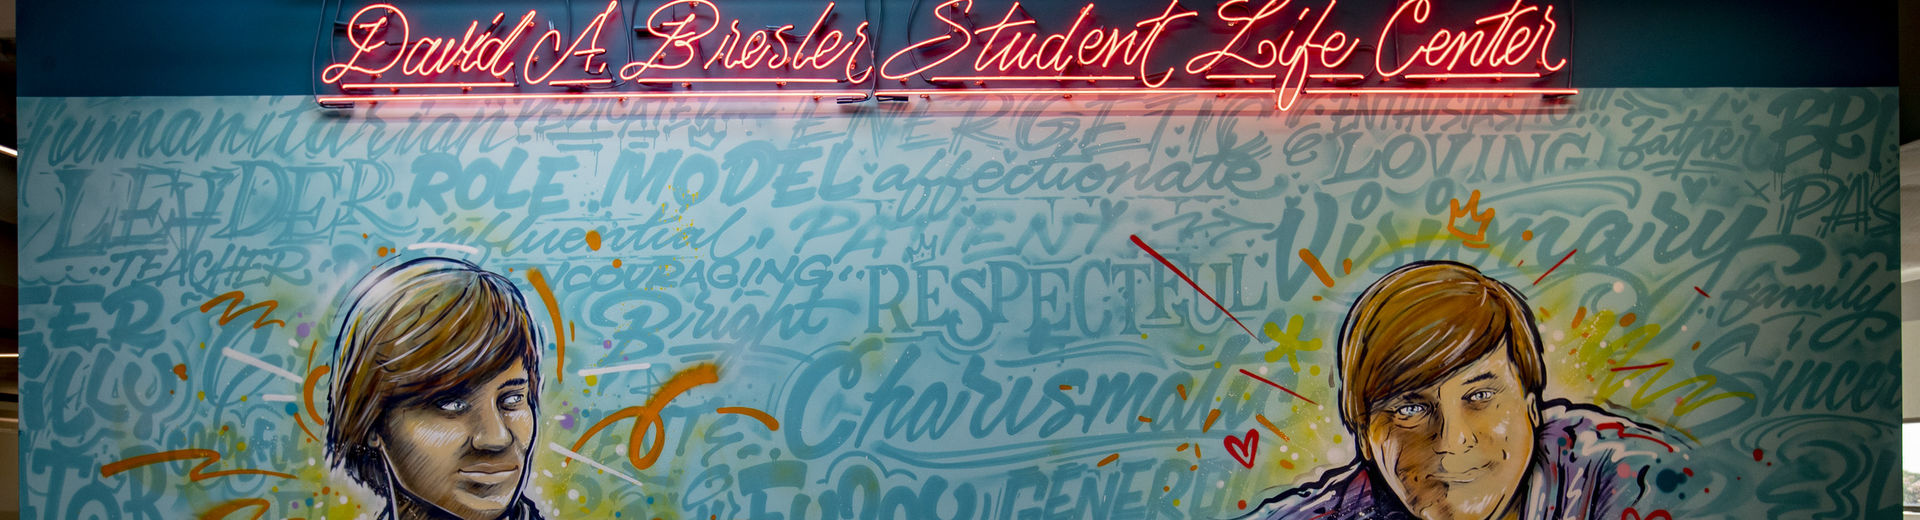 A mural at the entrance to the David A. Bresler Student Life Center.